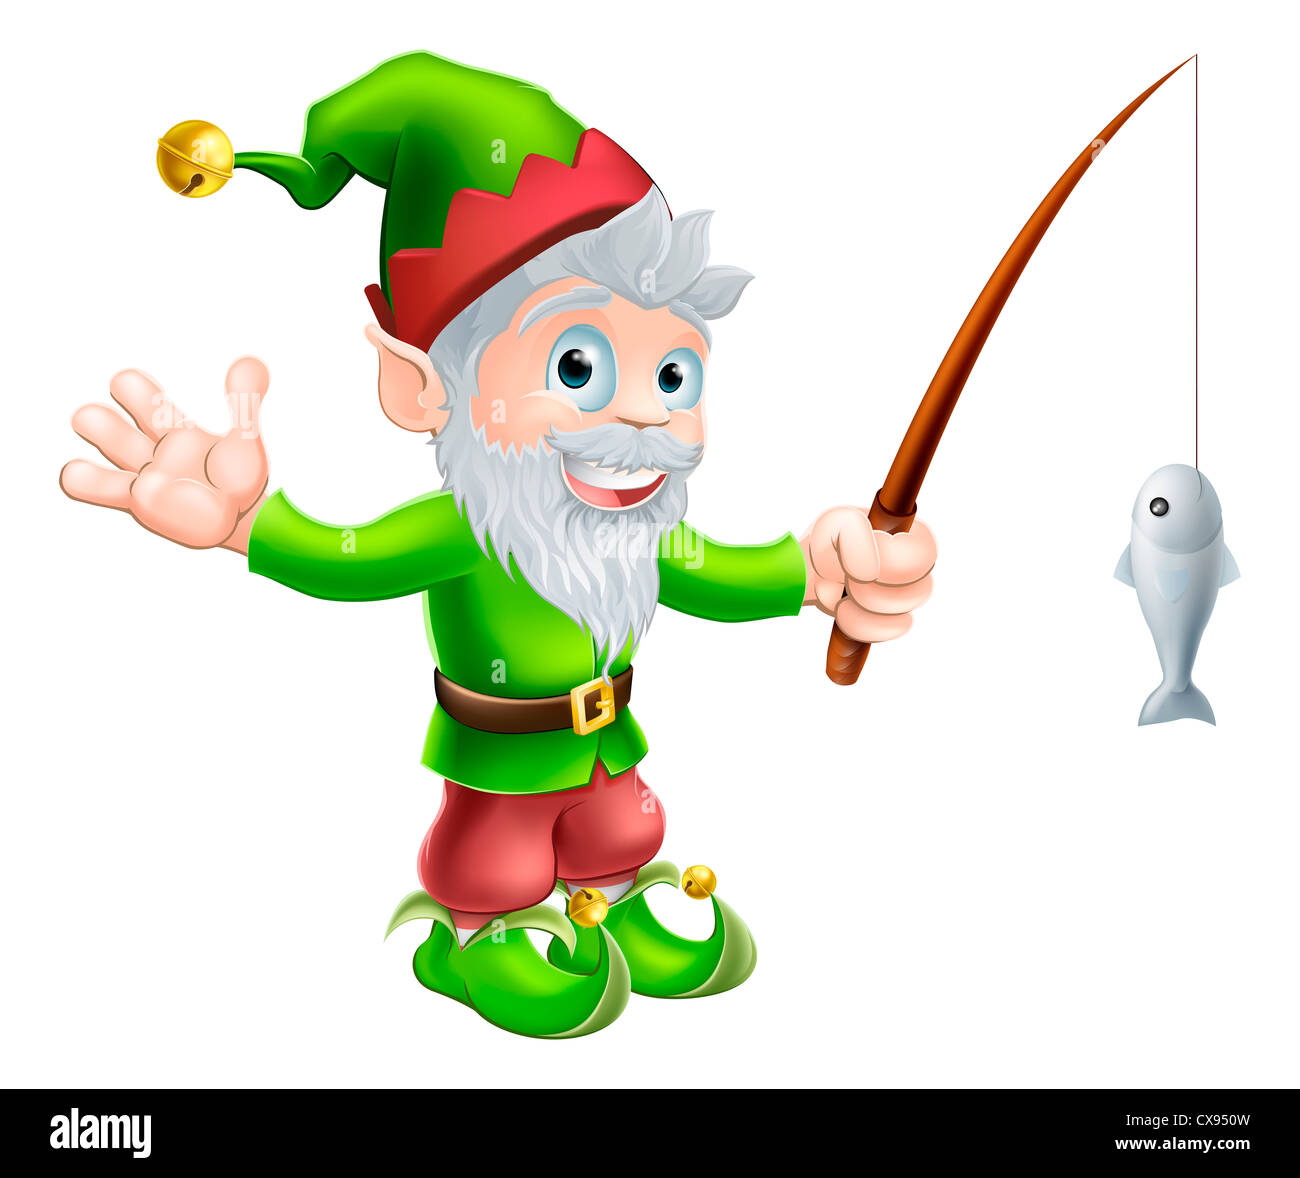 Illustration of a cute happy waving garden gnome elf character or mascot with a fishing rod Stock Photo